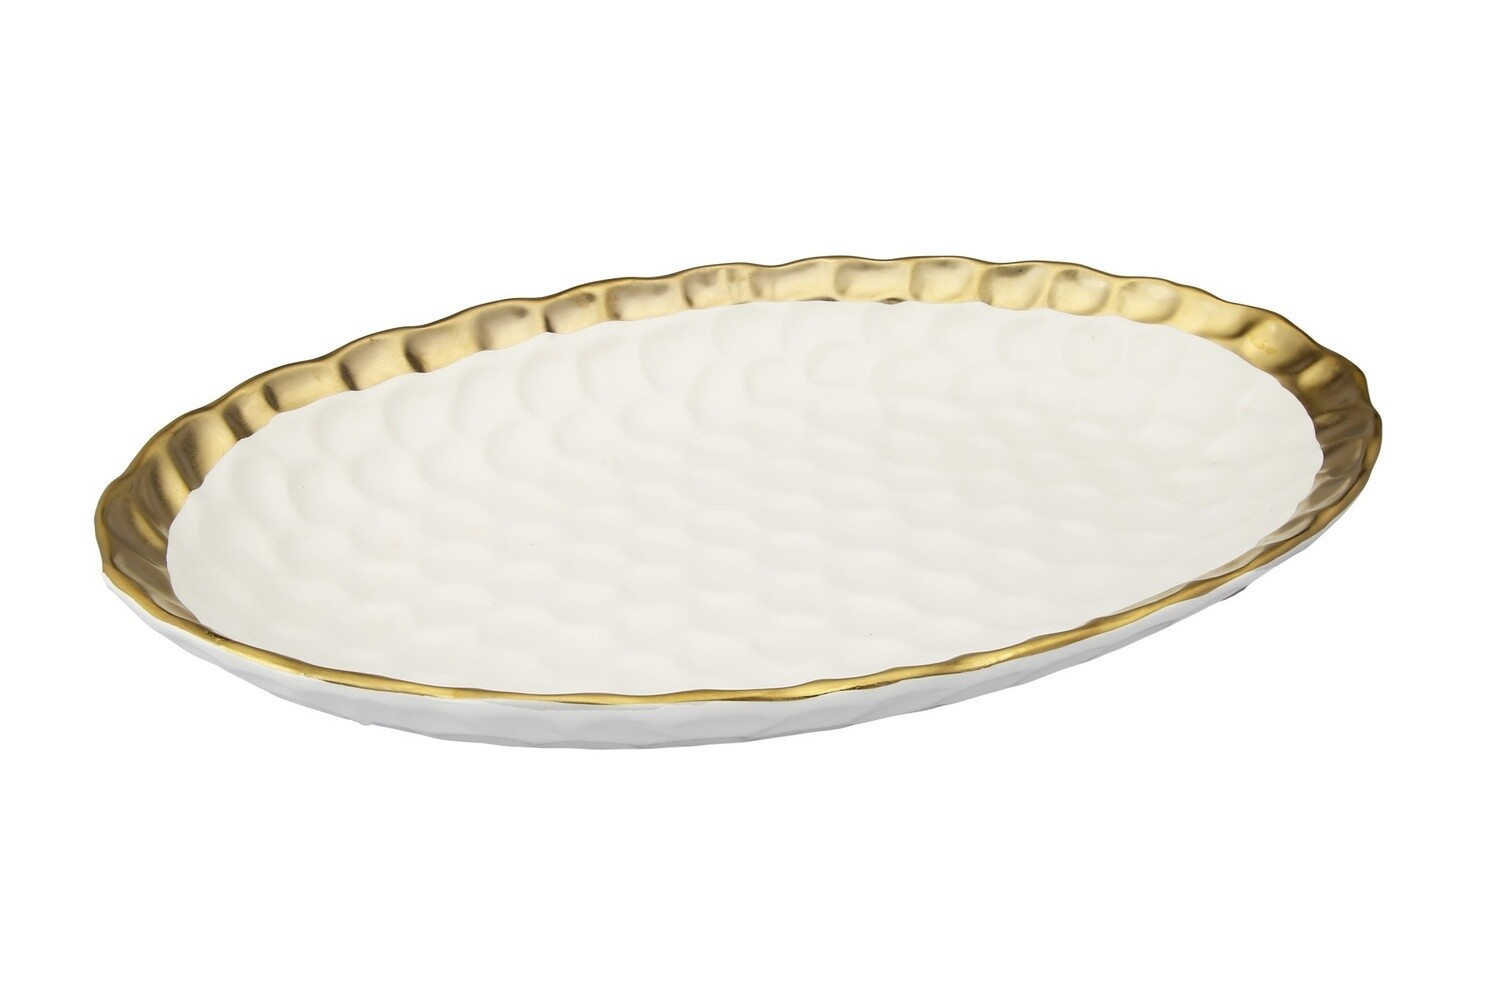 White Oval Platter with Gold Rim